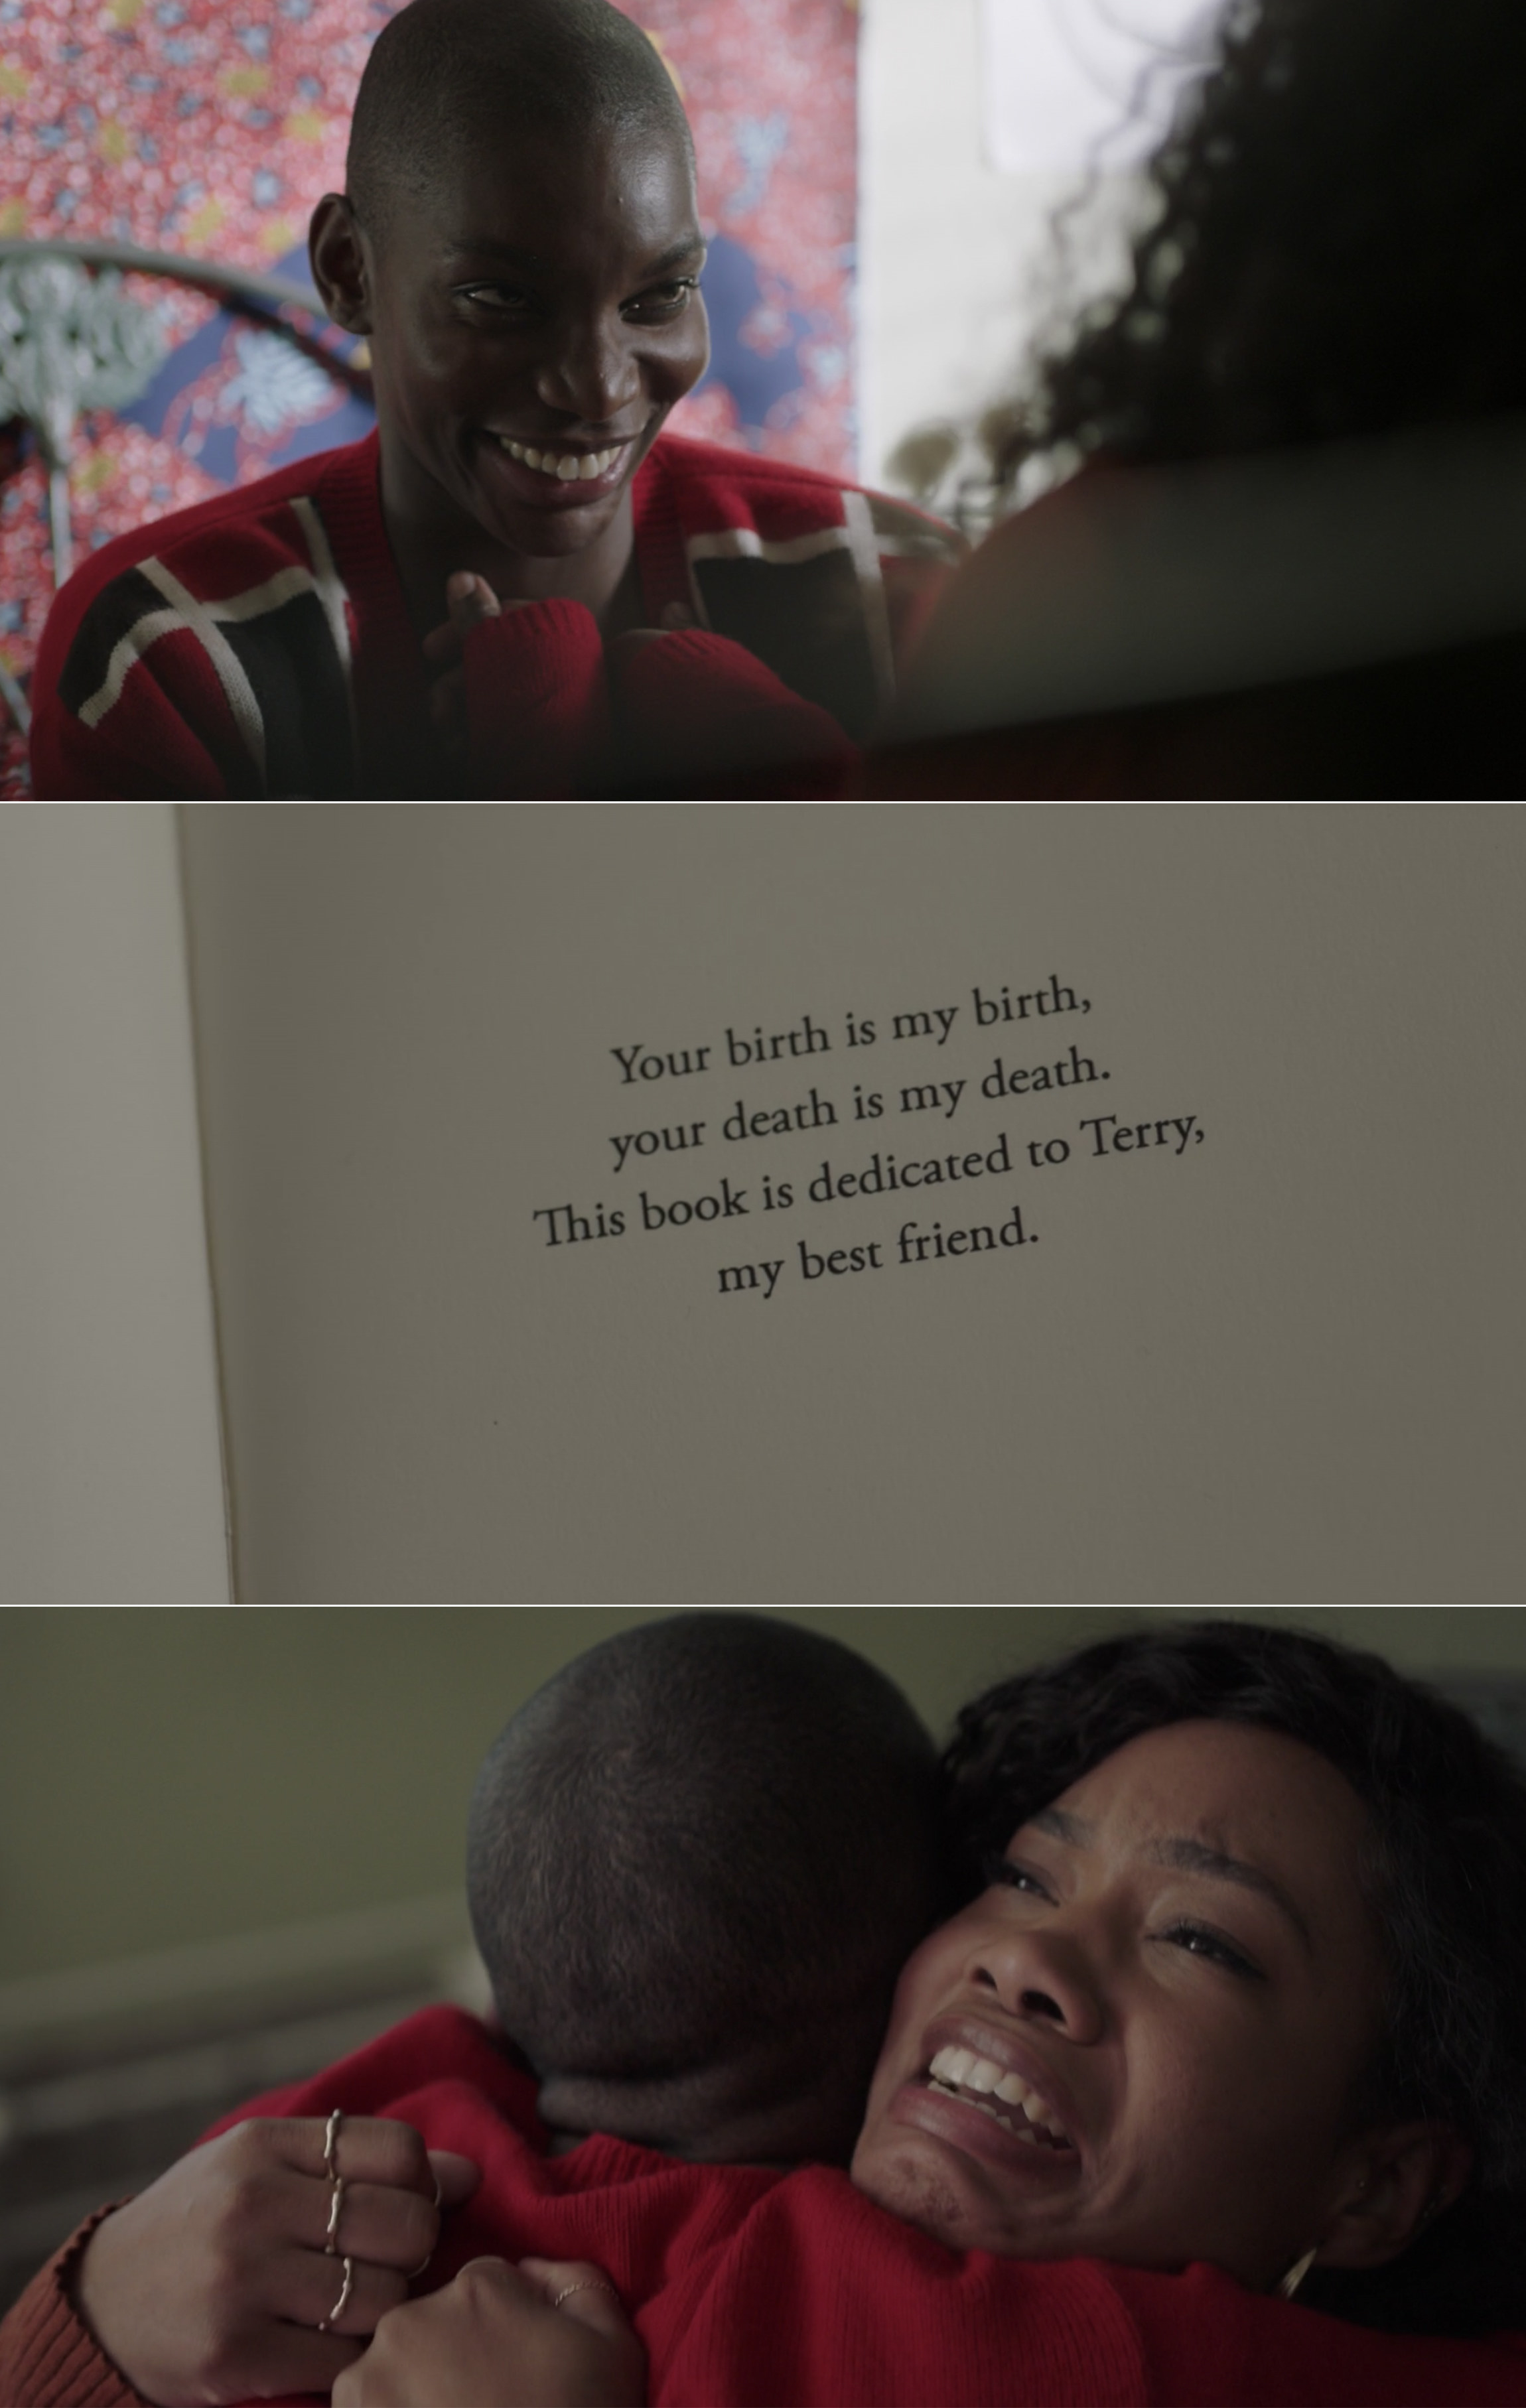 Terry reading the dedication in the book and hugging Arabella